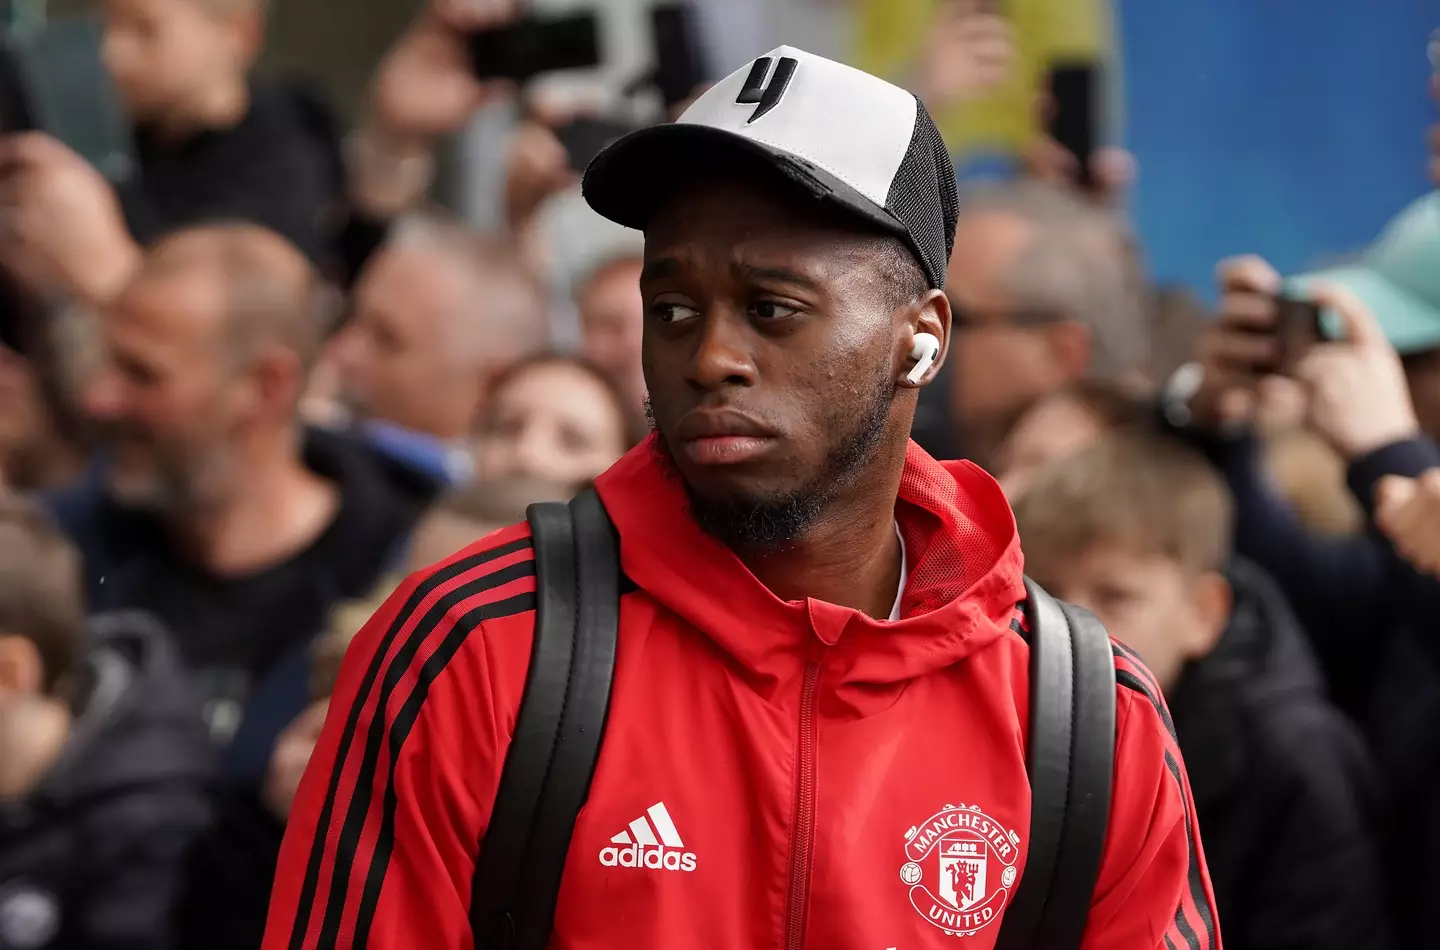 Wan-Bissaka's game time has been limited this season. (Image